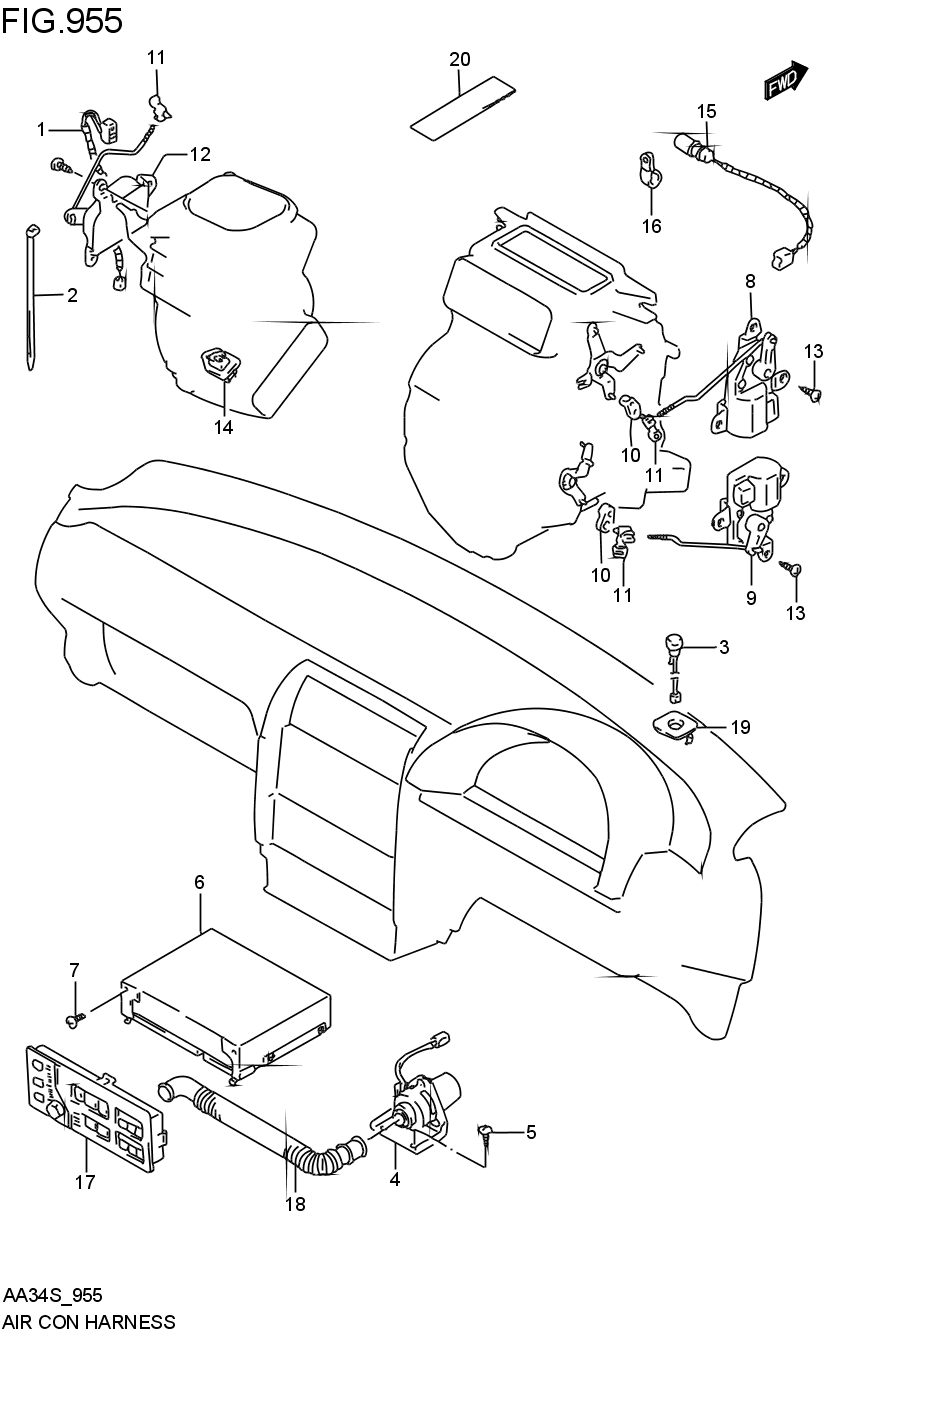 AIR CONDITIONER  HARNESS